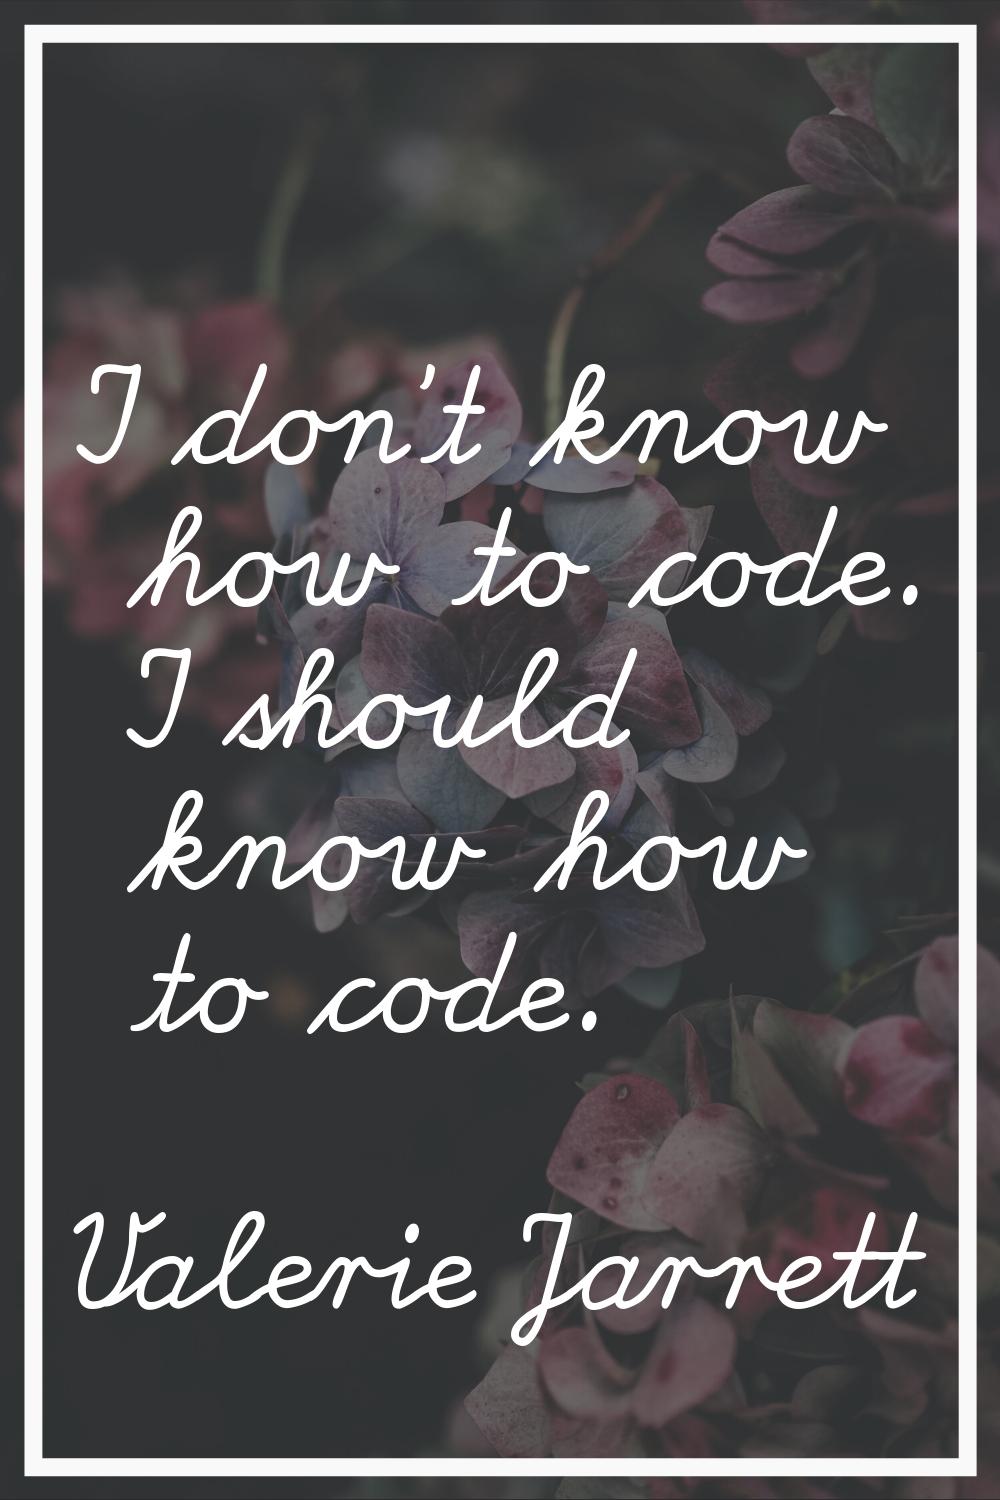 I don't know how to code. I should know how to code.